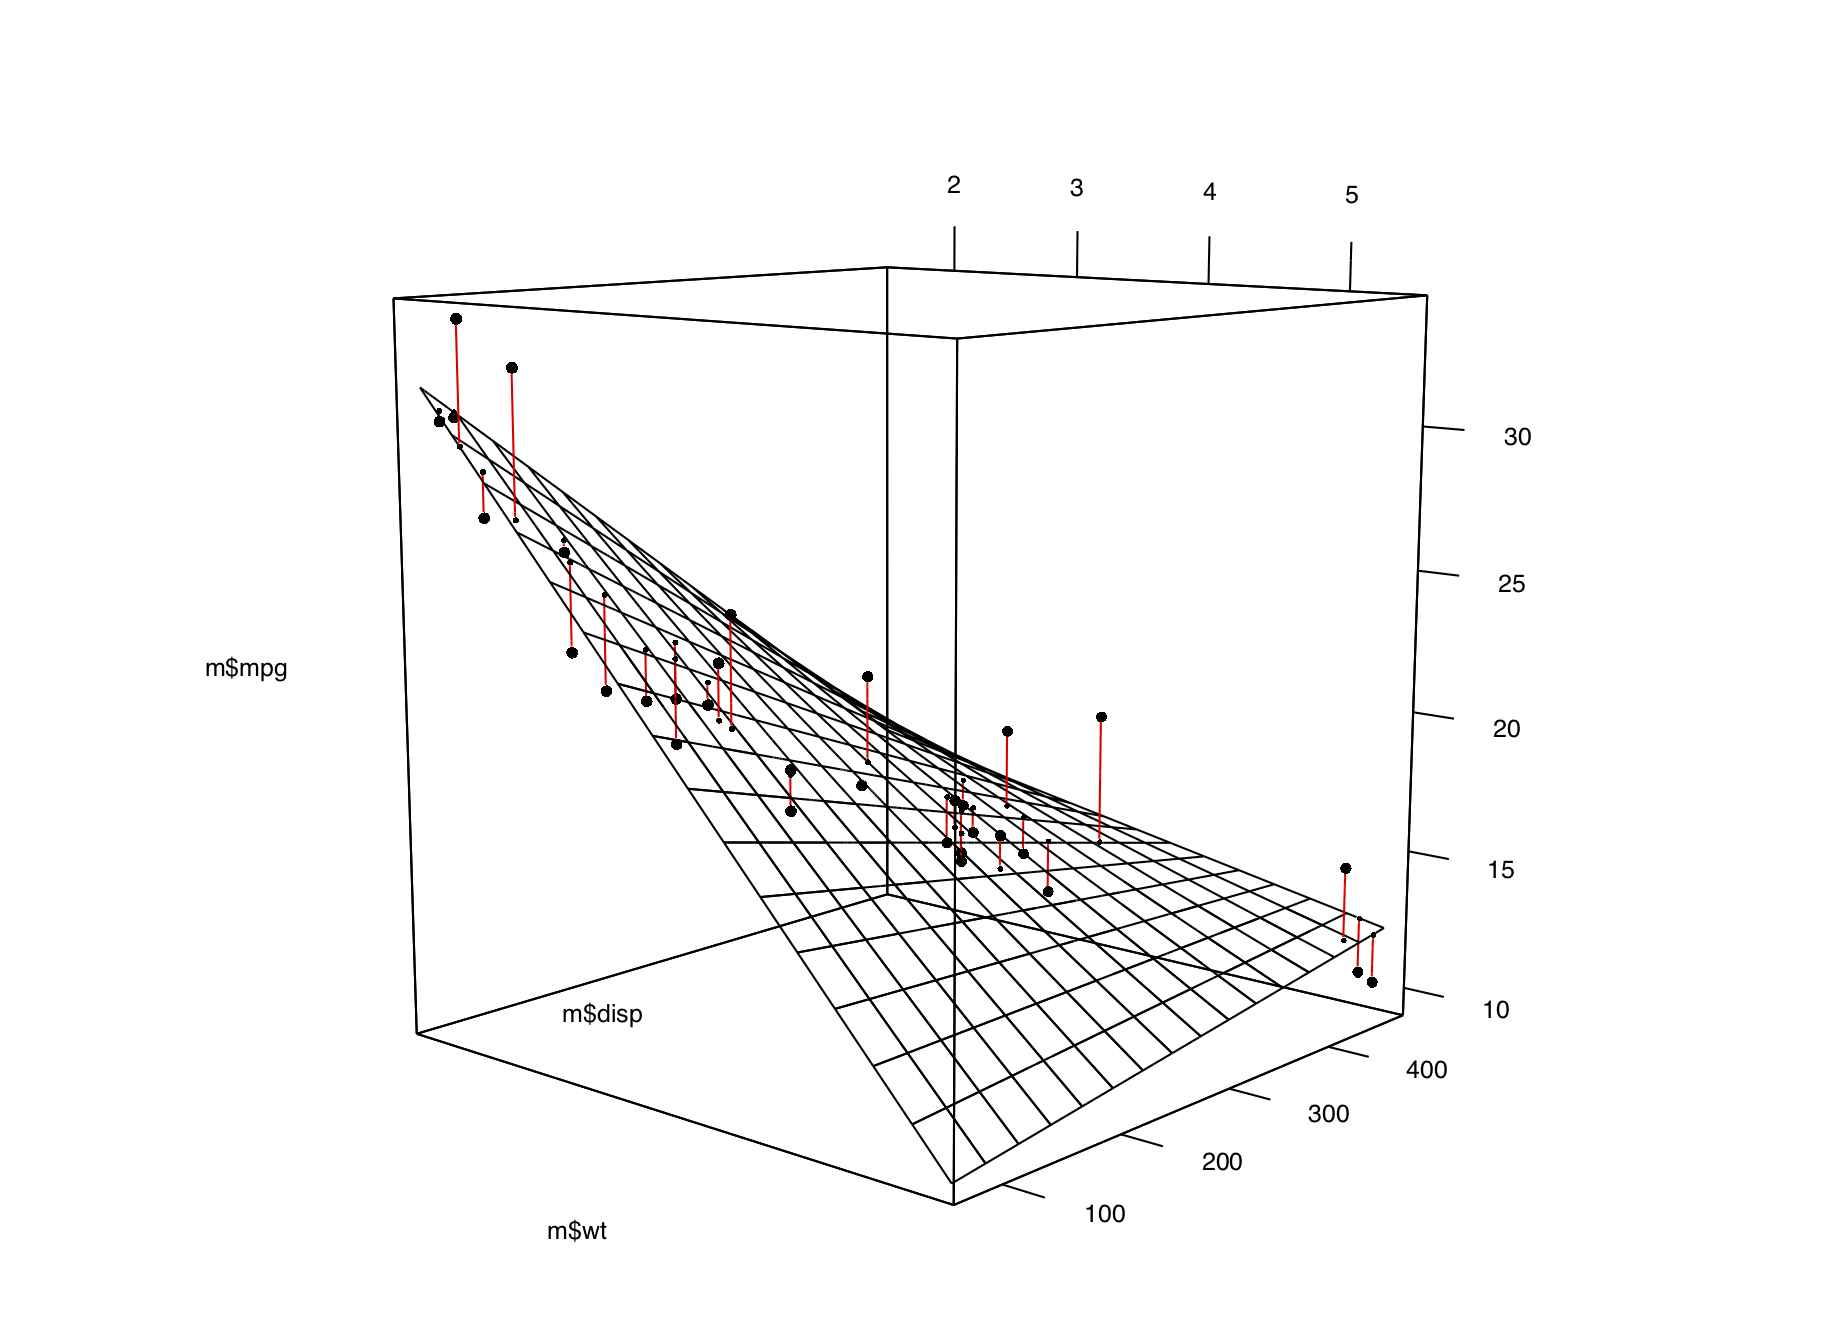 A 3D scatter plot with a prediction surface